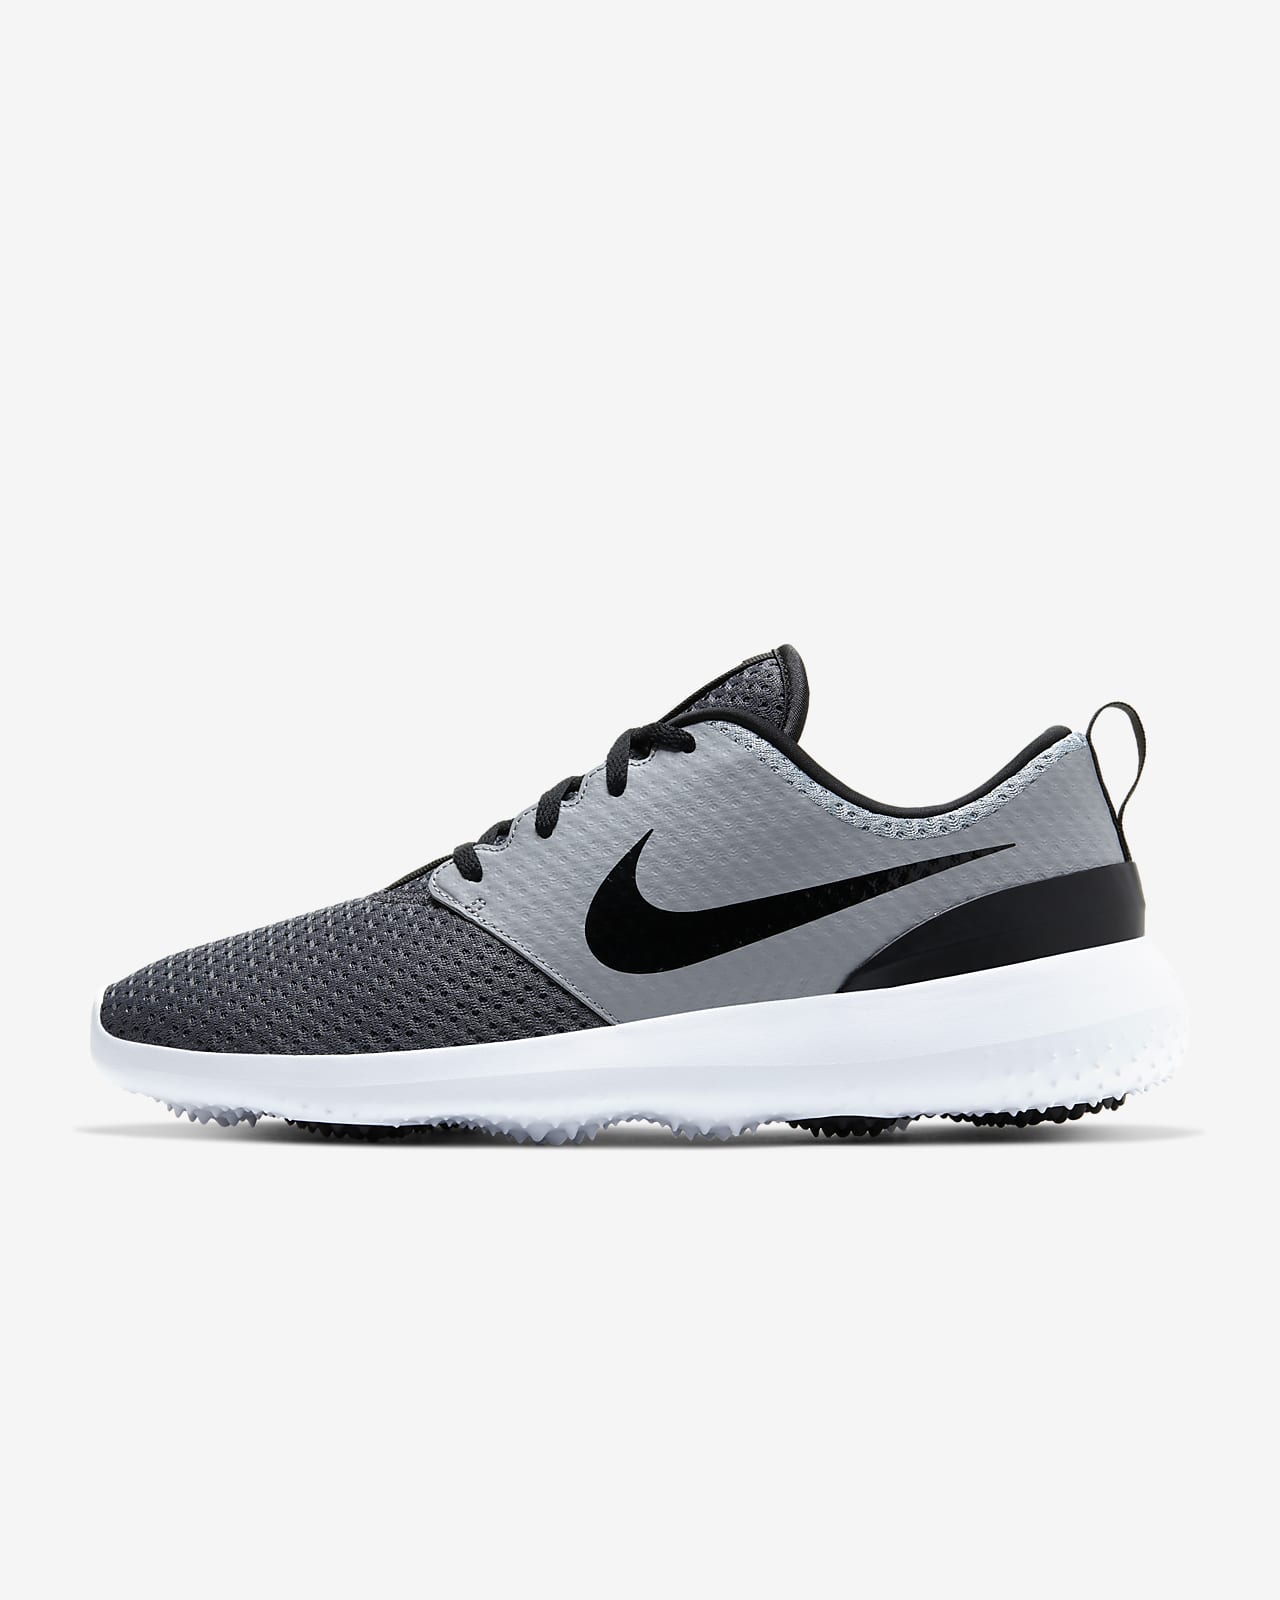 are nike roshes good for working out